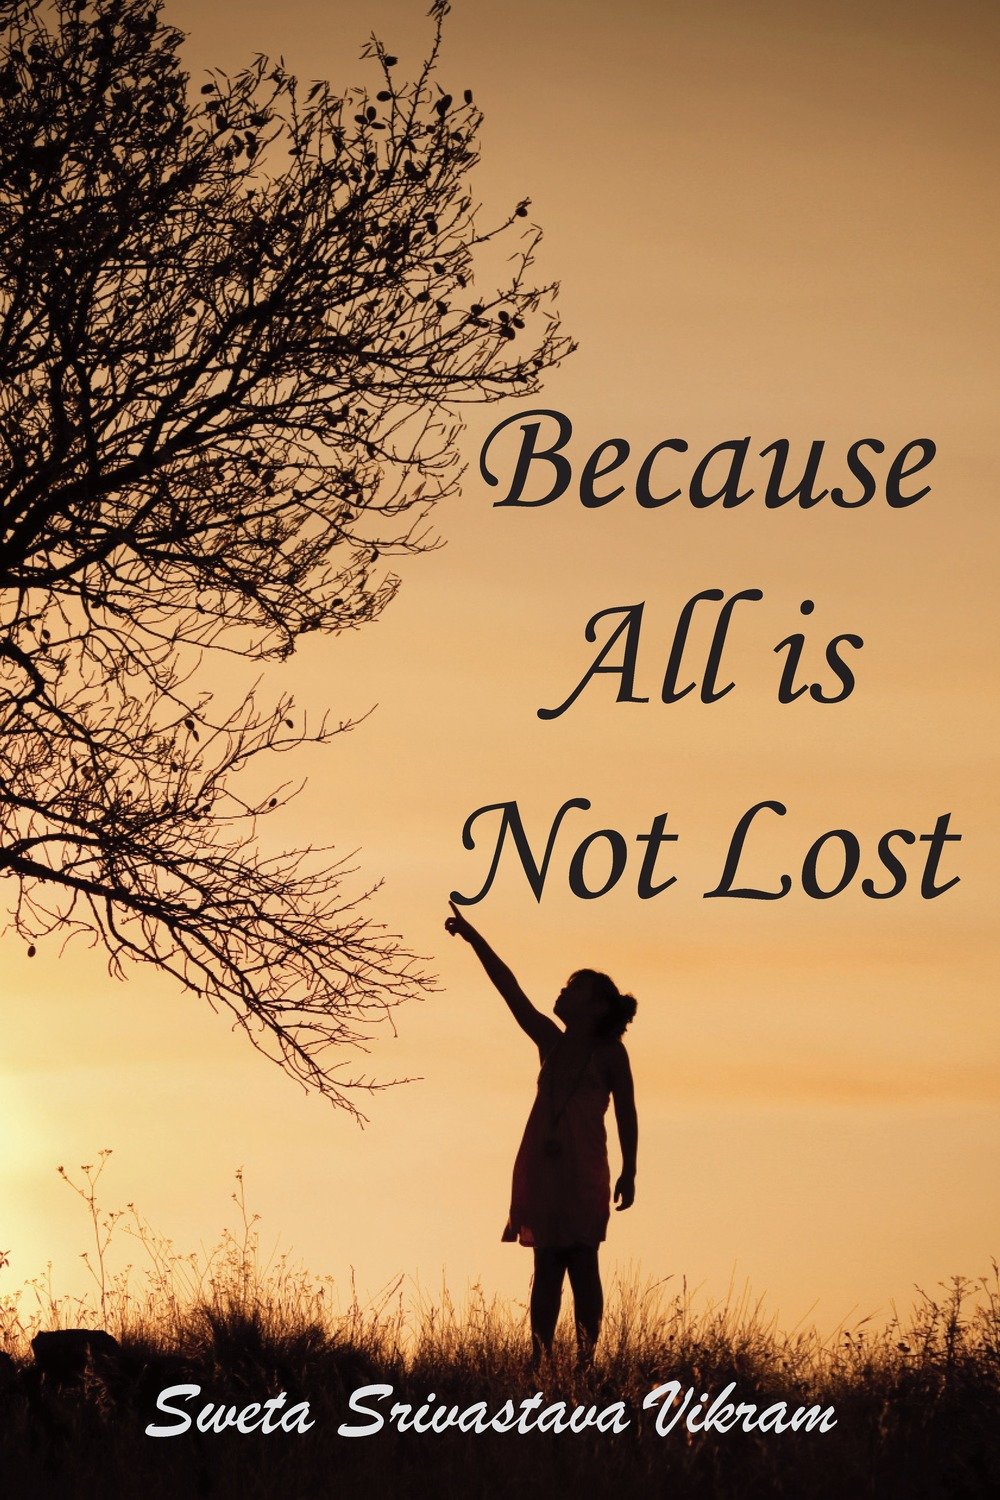 Because all is not lost: Verse on Grief